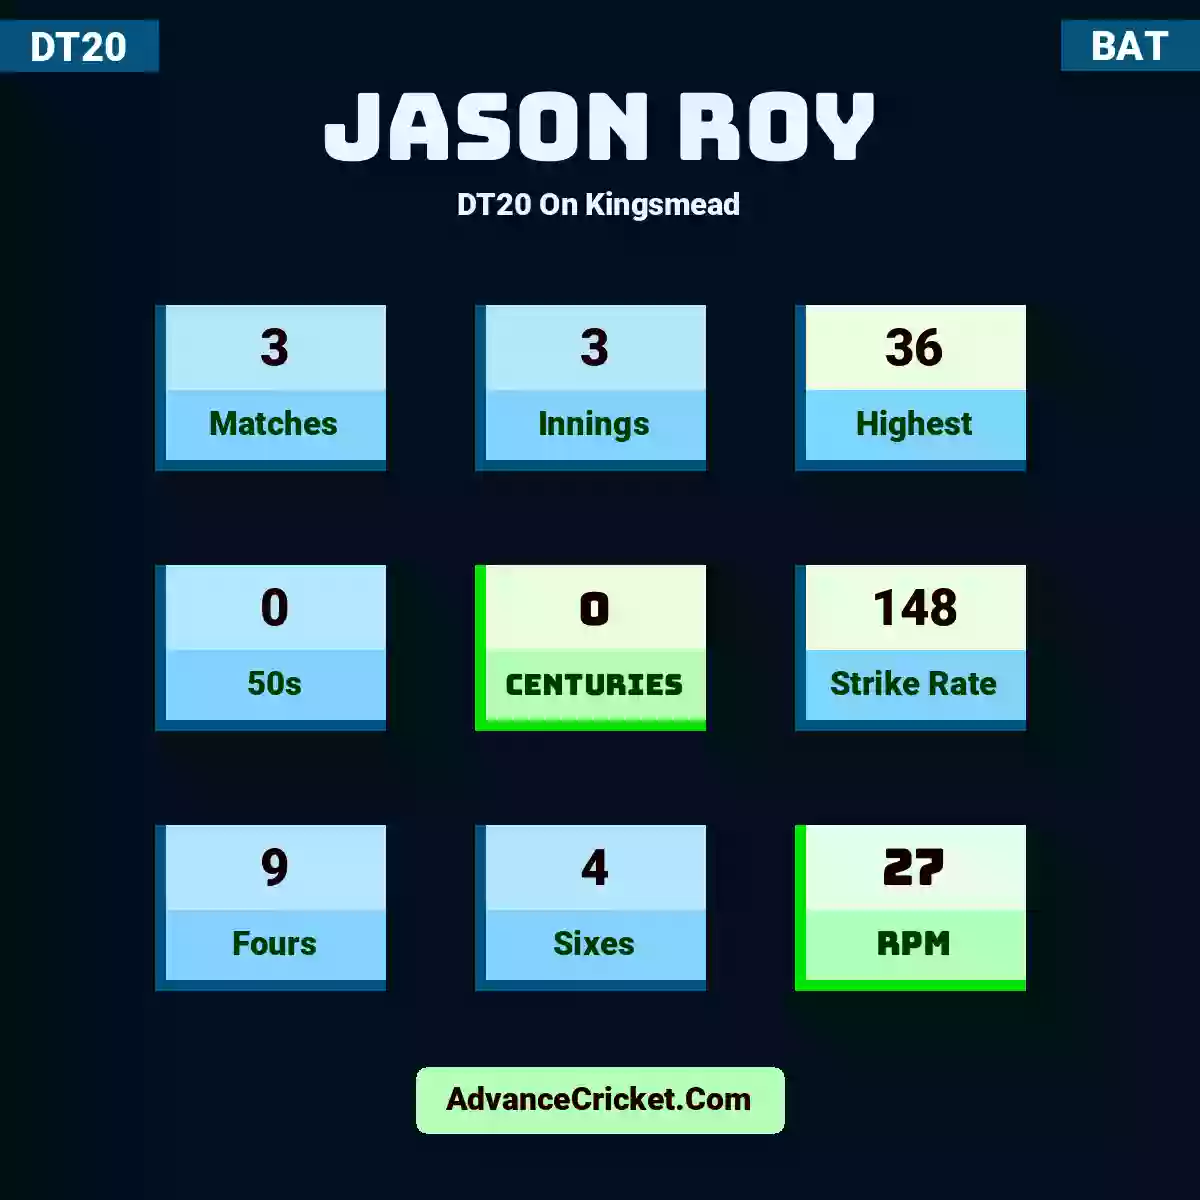 Jason Roy DT20  On Kingsmead, Jason Roy played 3 matches, scored 36 runs as highest, 0 half-centuries, and 0 centuries, with a strike rate of 148. J.Roy hit 9 fours and 4 sixes, with an RPM of 27.